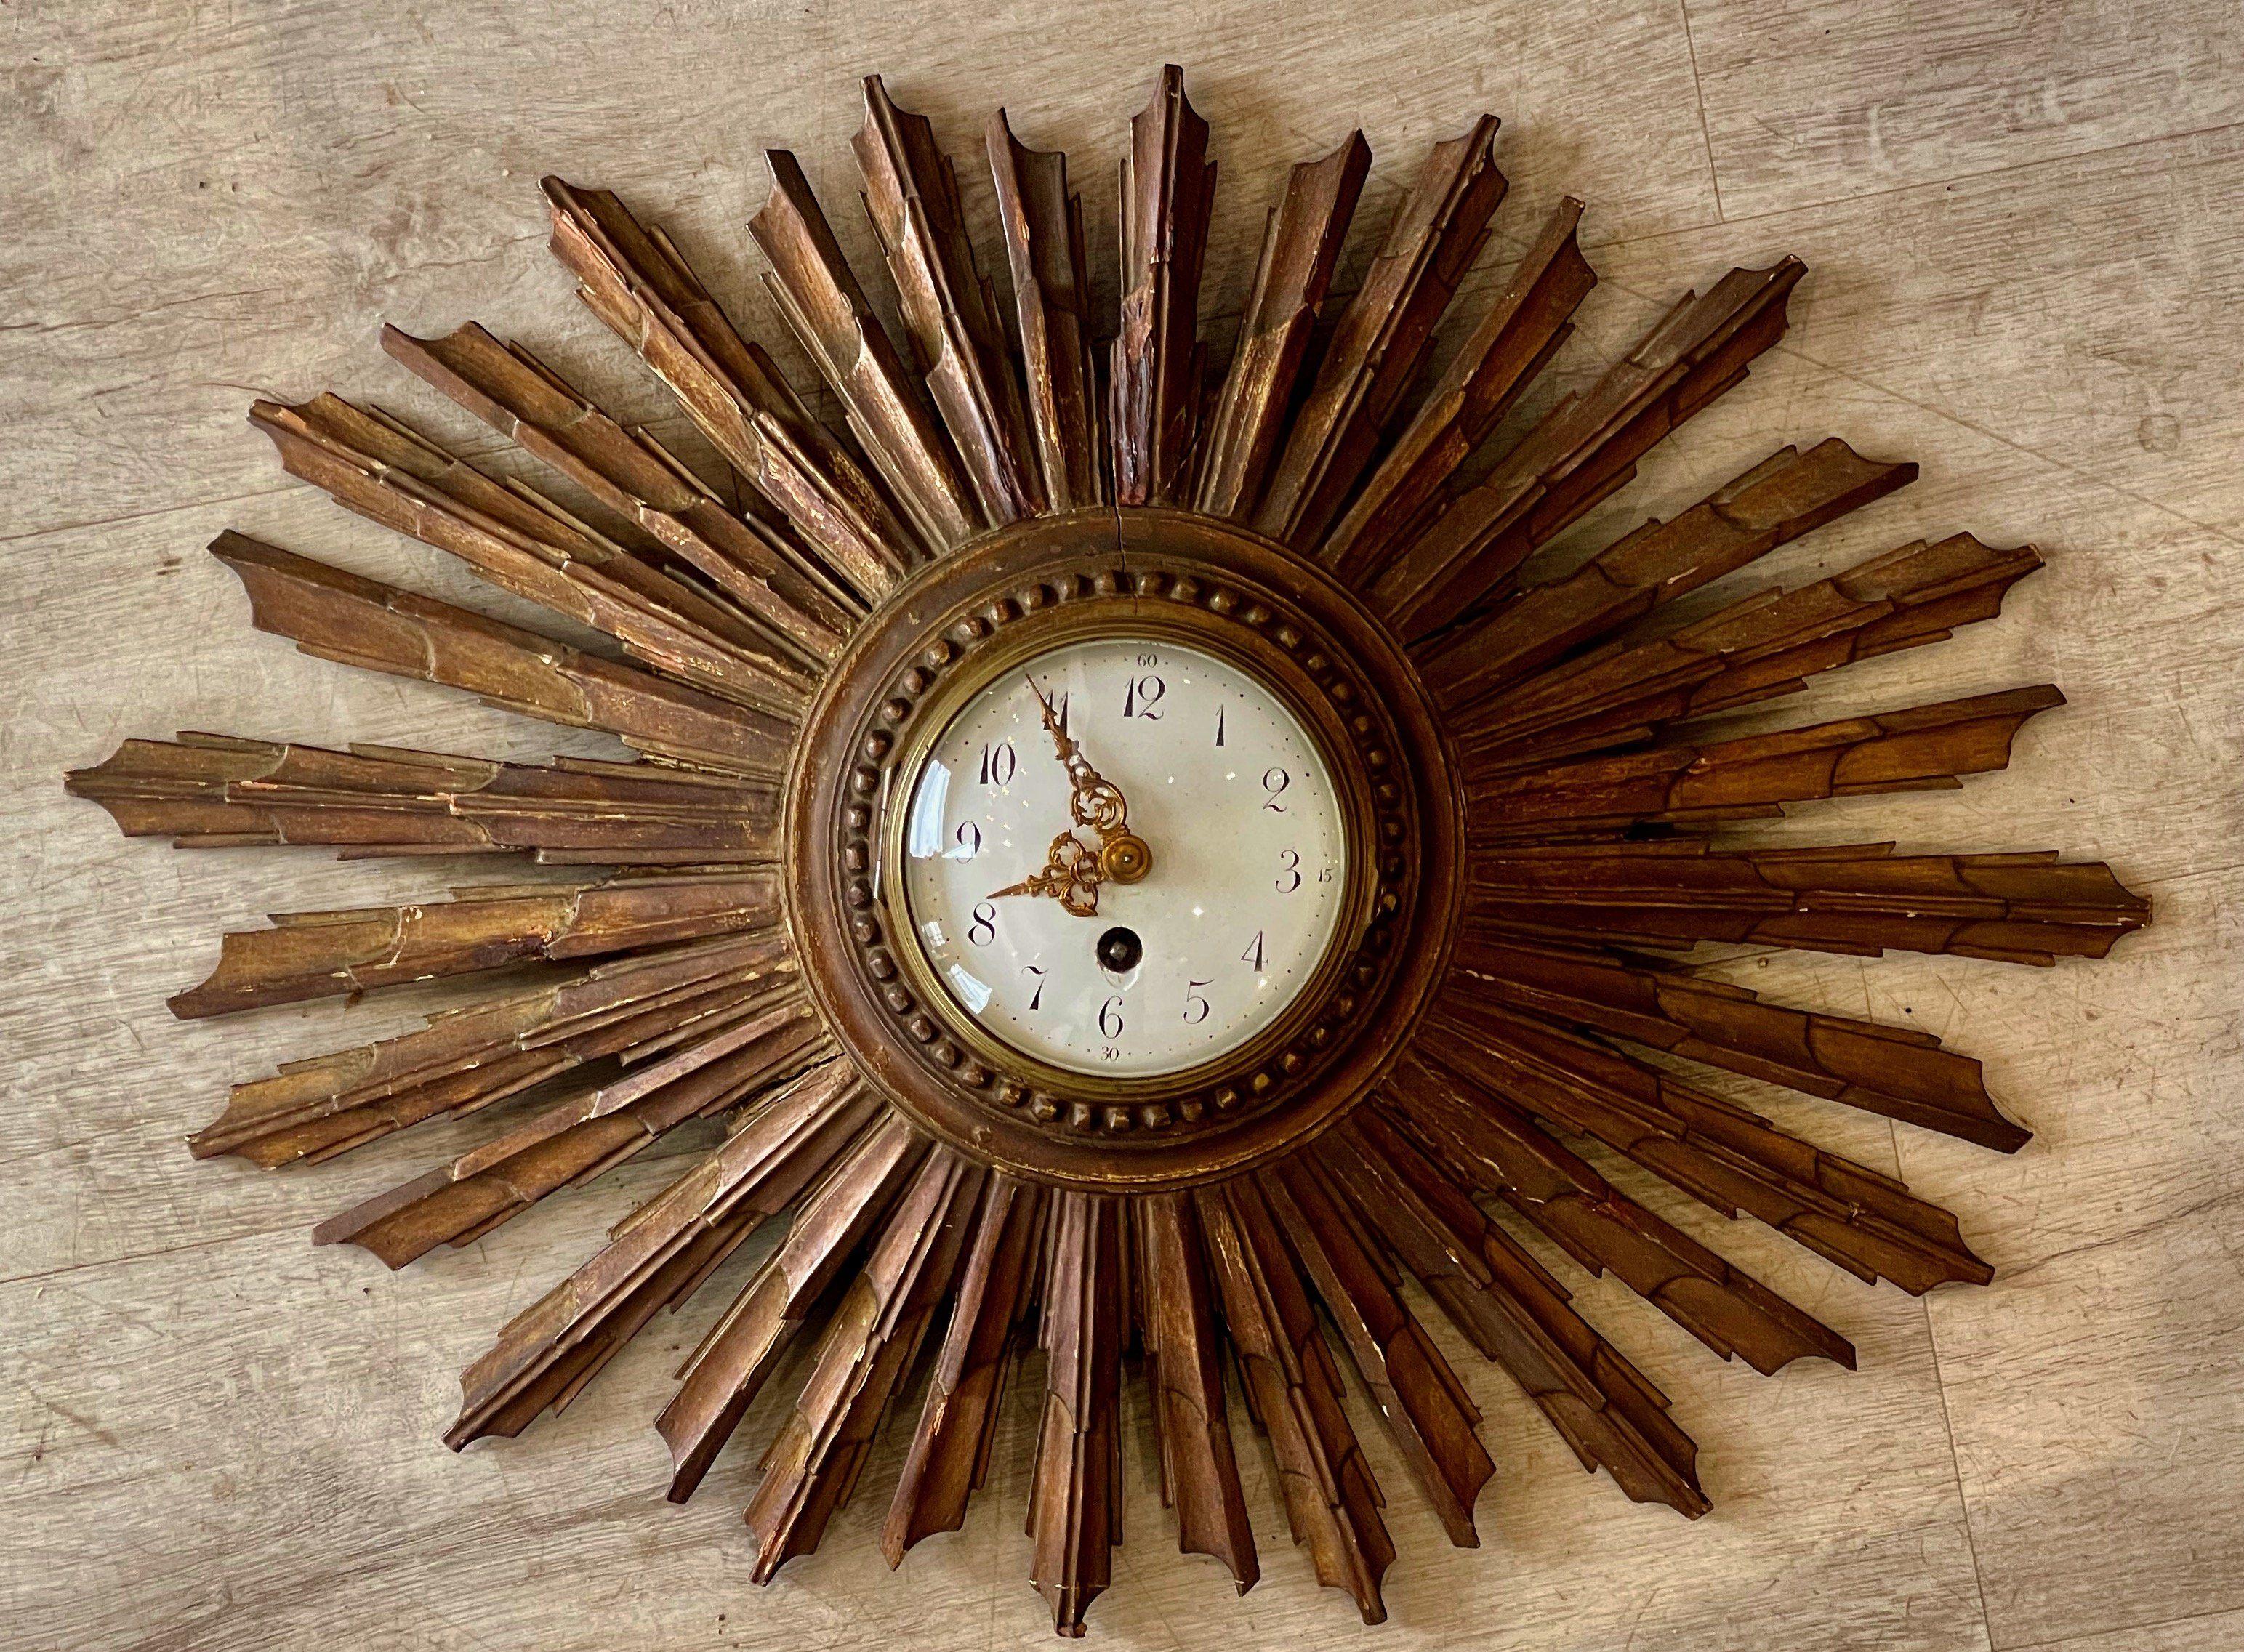 Late 19th-early 20th century French sunburst clock, the carved rays surrounding a beaded circle encasing an enamel-faced clock having fine gilt hands. In working condition.